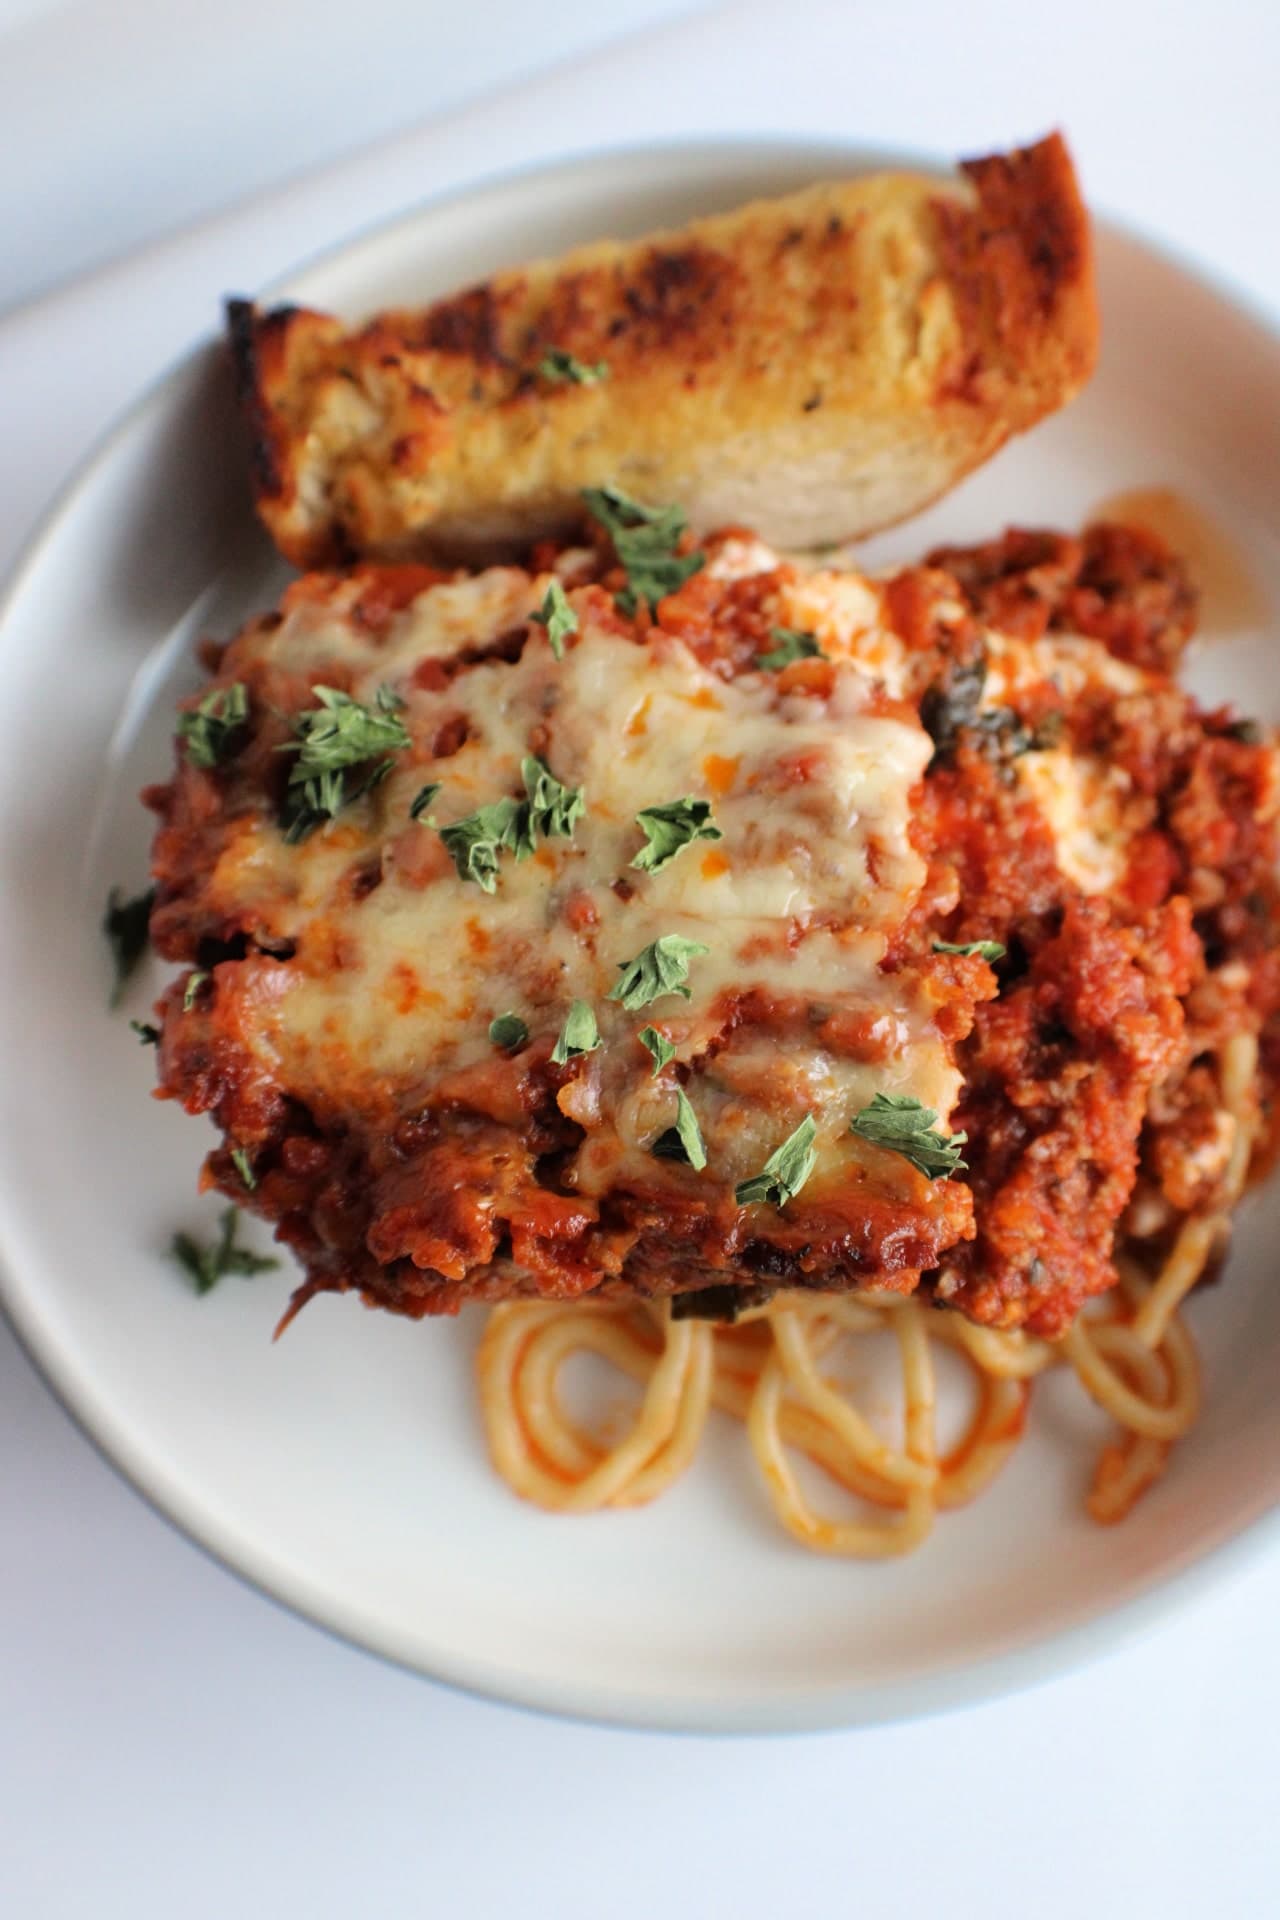 baked spaghetti casserole on a plate with garlic bread